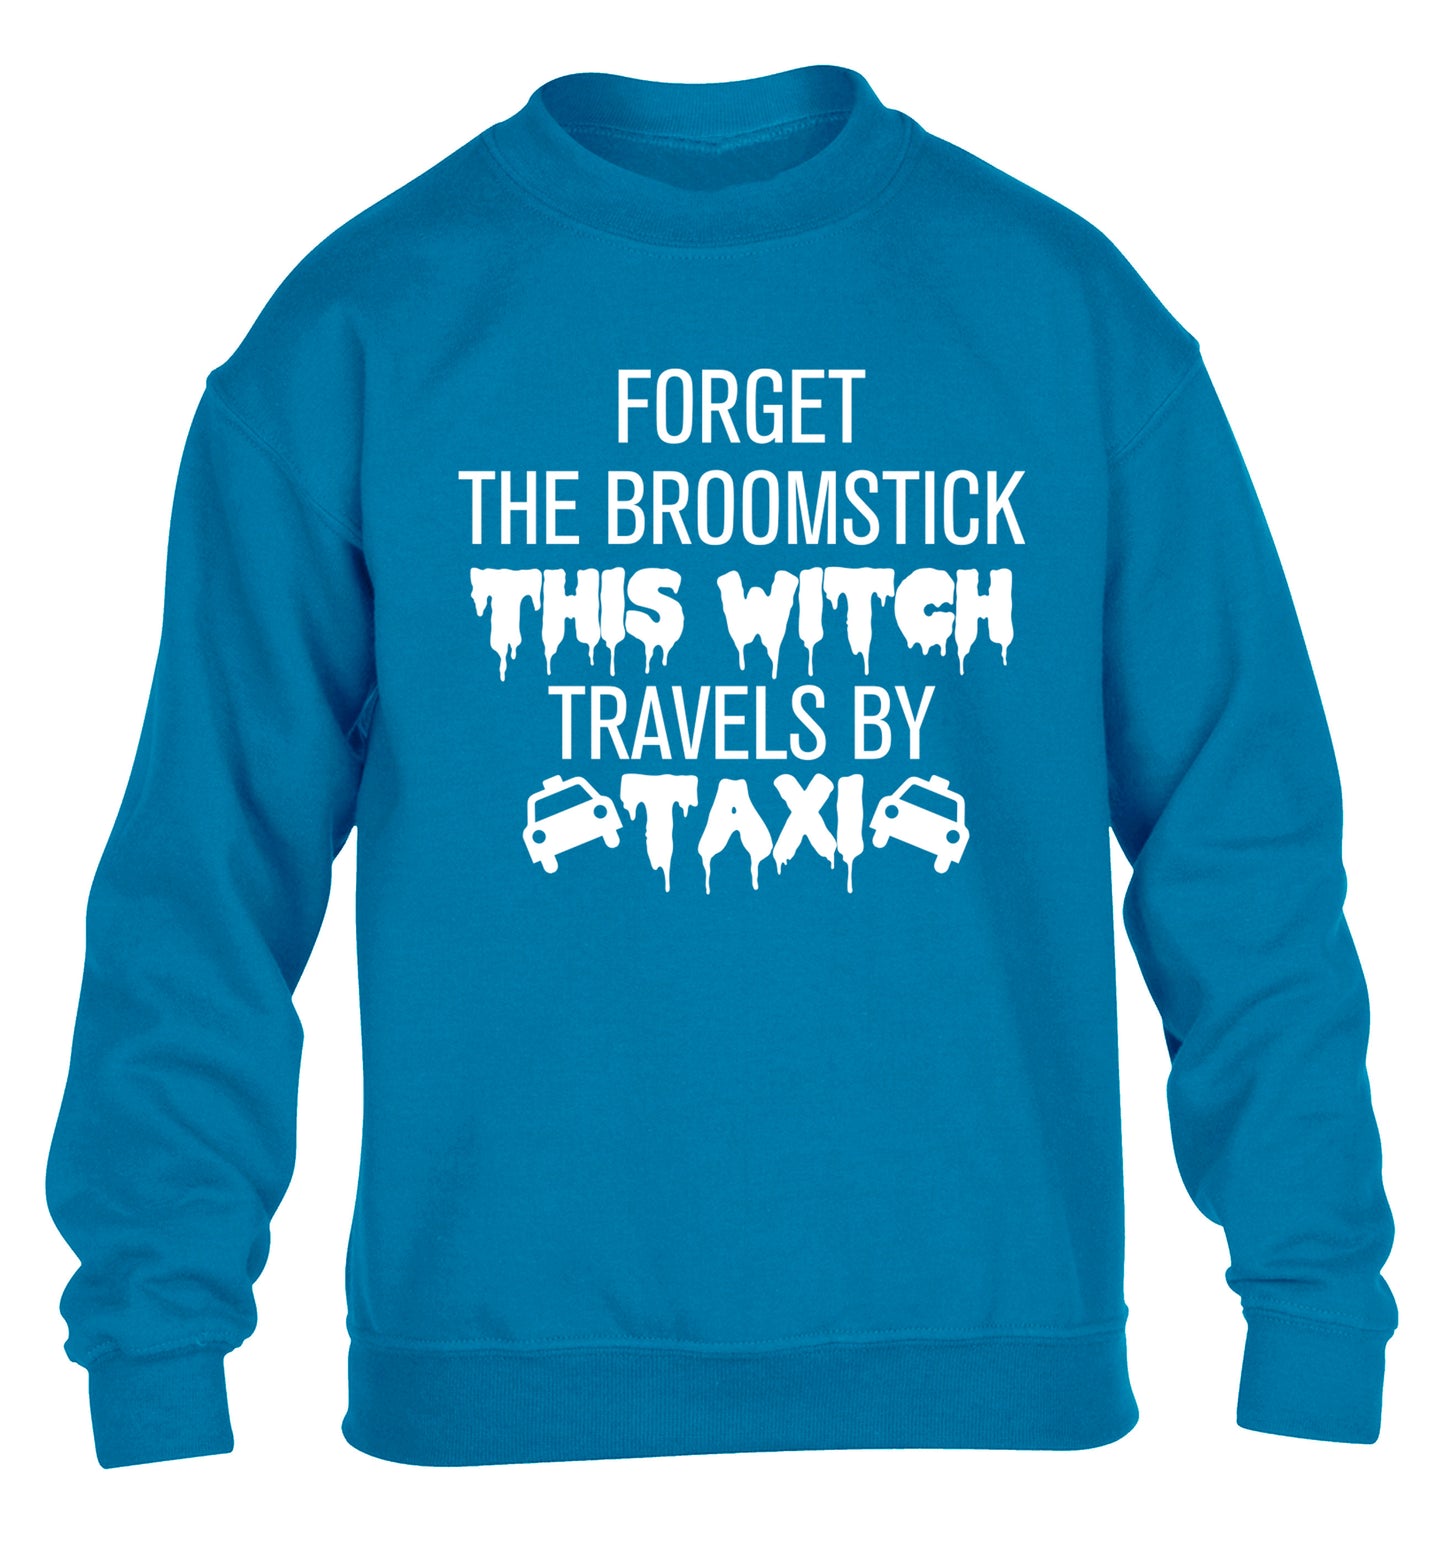 Forget the broomstick this witch travels by taxi children's blue sweater 12-14 Years